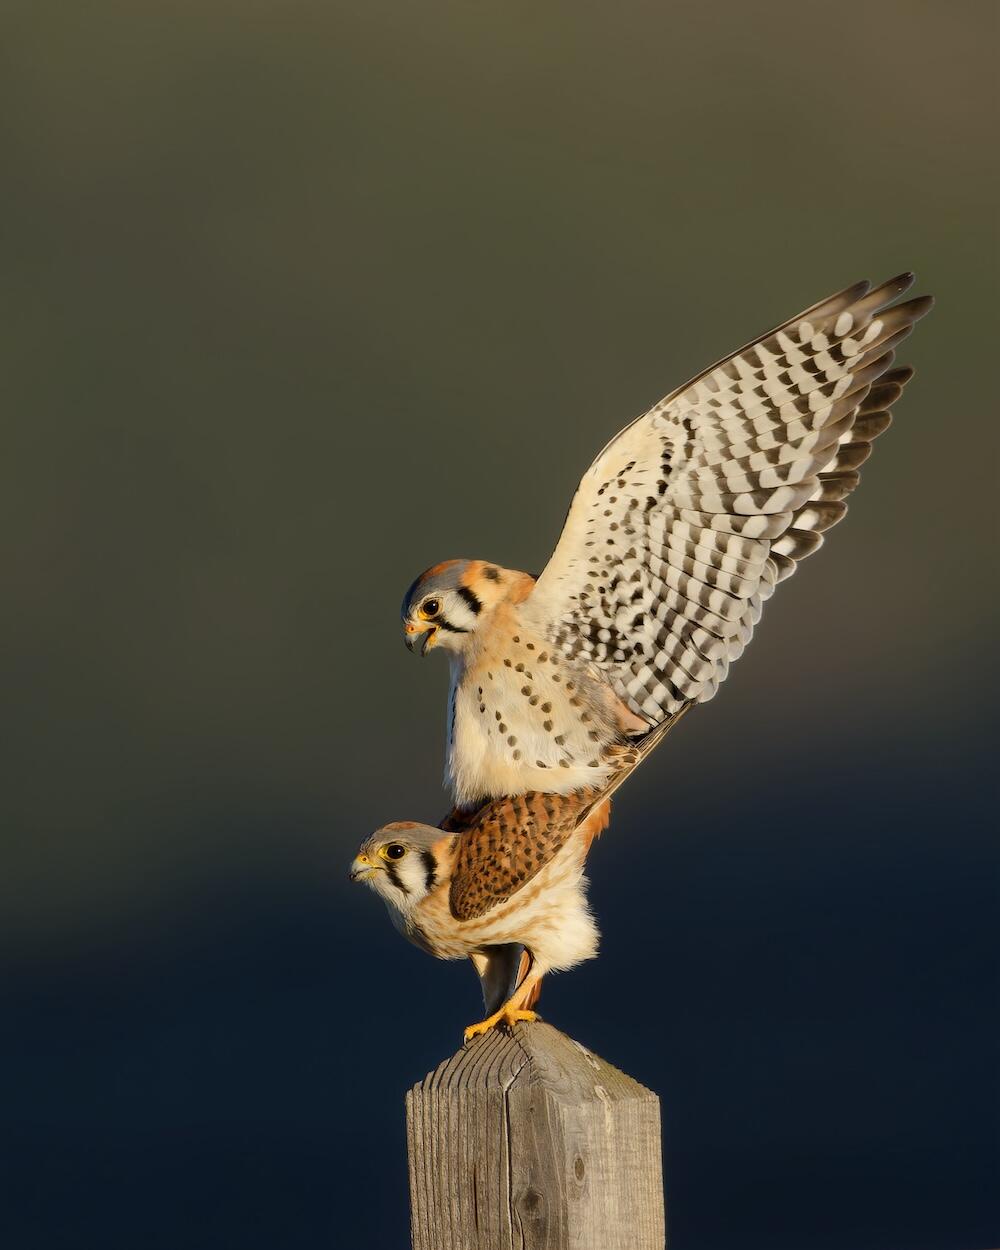 An American Kestrel stands on a post in profile, and a male kestrel is on her back with his wings stretched behind him. The birds are both in profile facing the left of the frame, the male above appearing to be an extension of the female below.